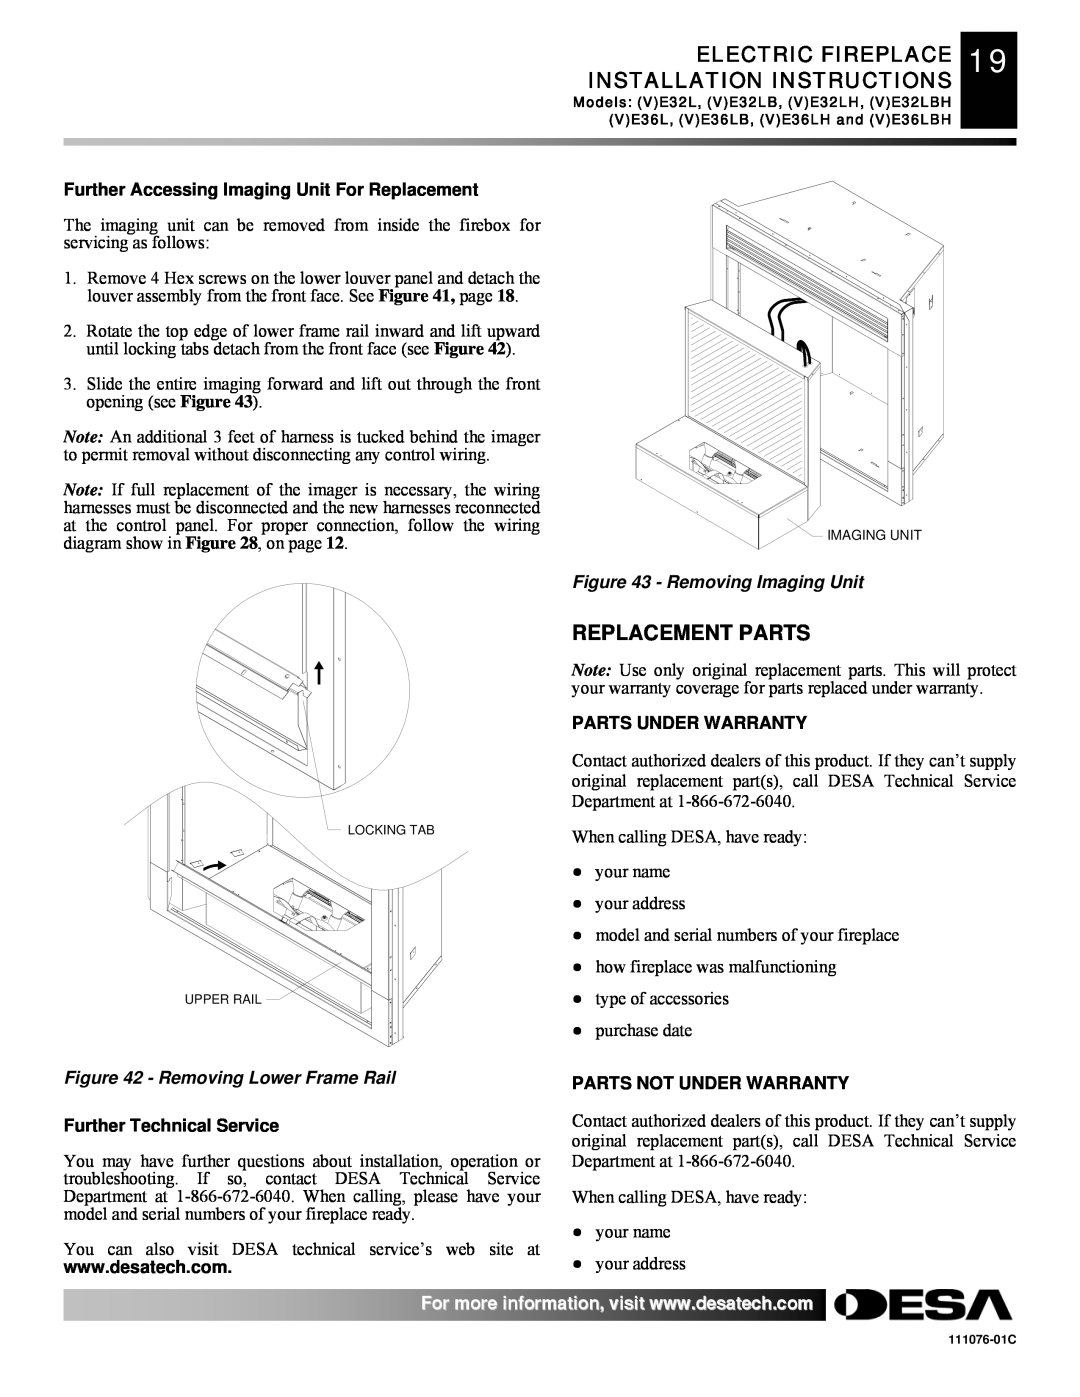 Desa E36(L)(B)(H) ELECTRIC FIREPLACE 19 INSTALLATION INSTRUCTIONS, Replacement Parts, Removing Imaging Unit 